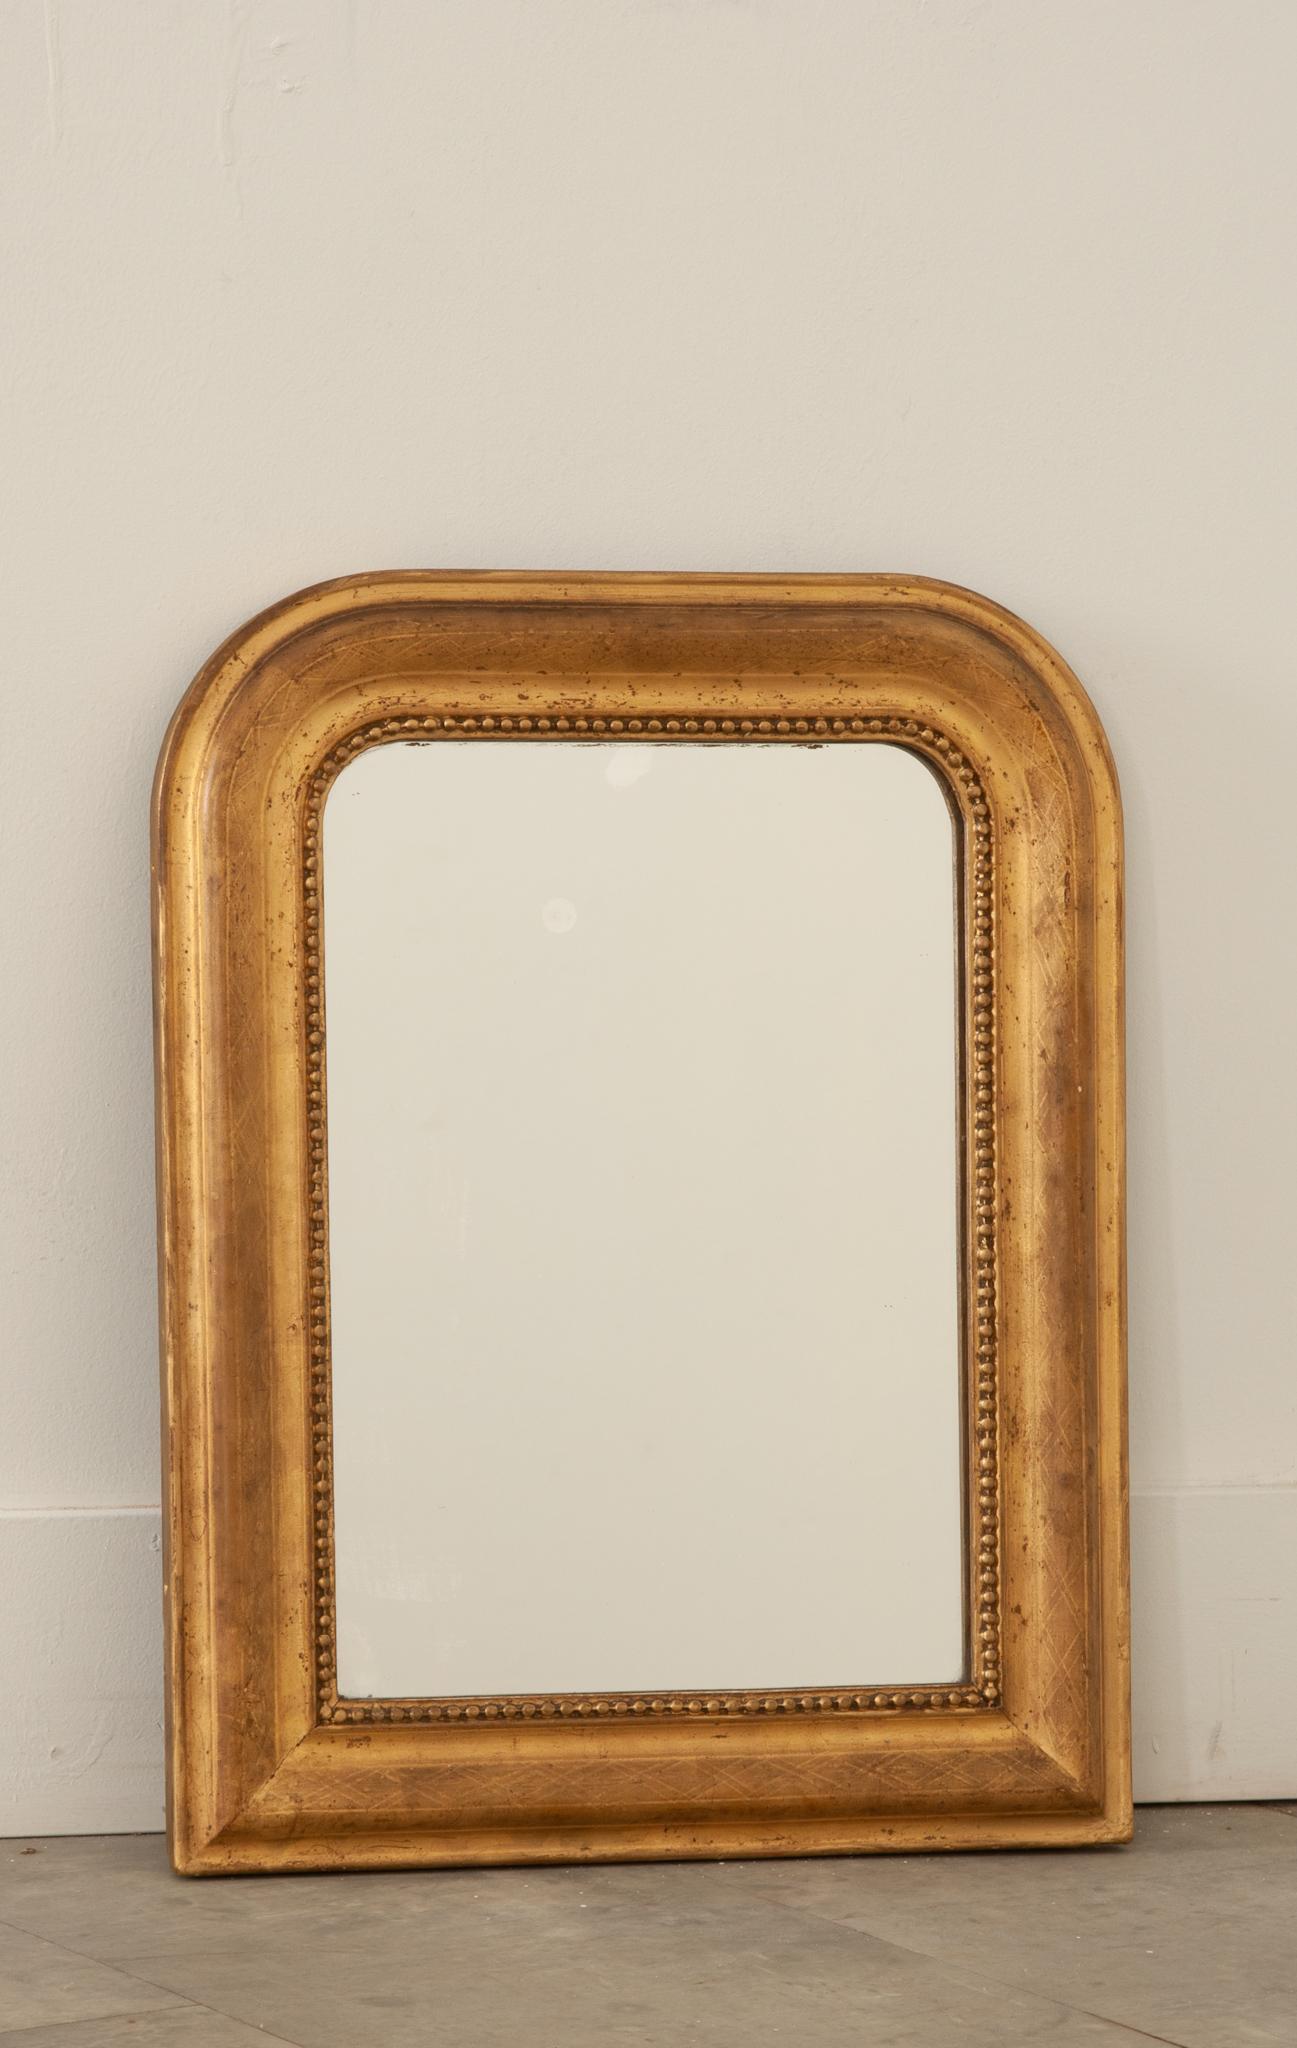 A darling petite mirror crafted in 19th century France. The original mercury mirror is in great condition and is surrounded by a carved bead border. A faint crosshatch pattern decorates the frame. The quality gilt has gained a beautiful patina over